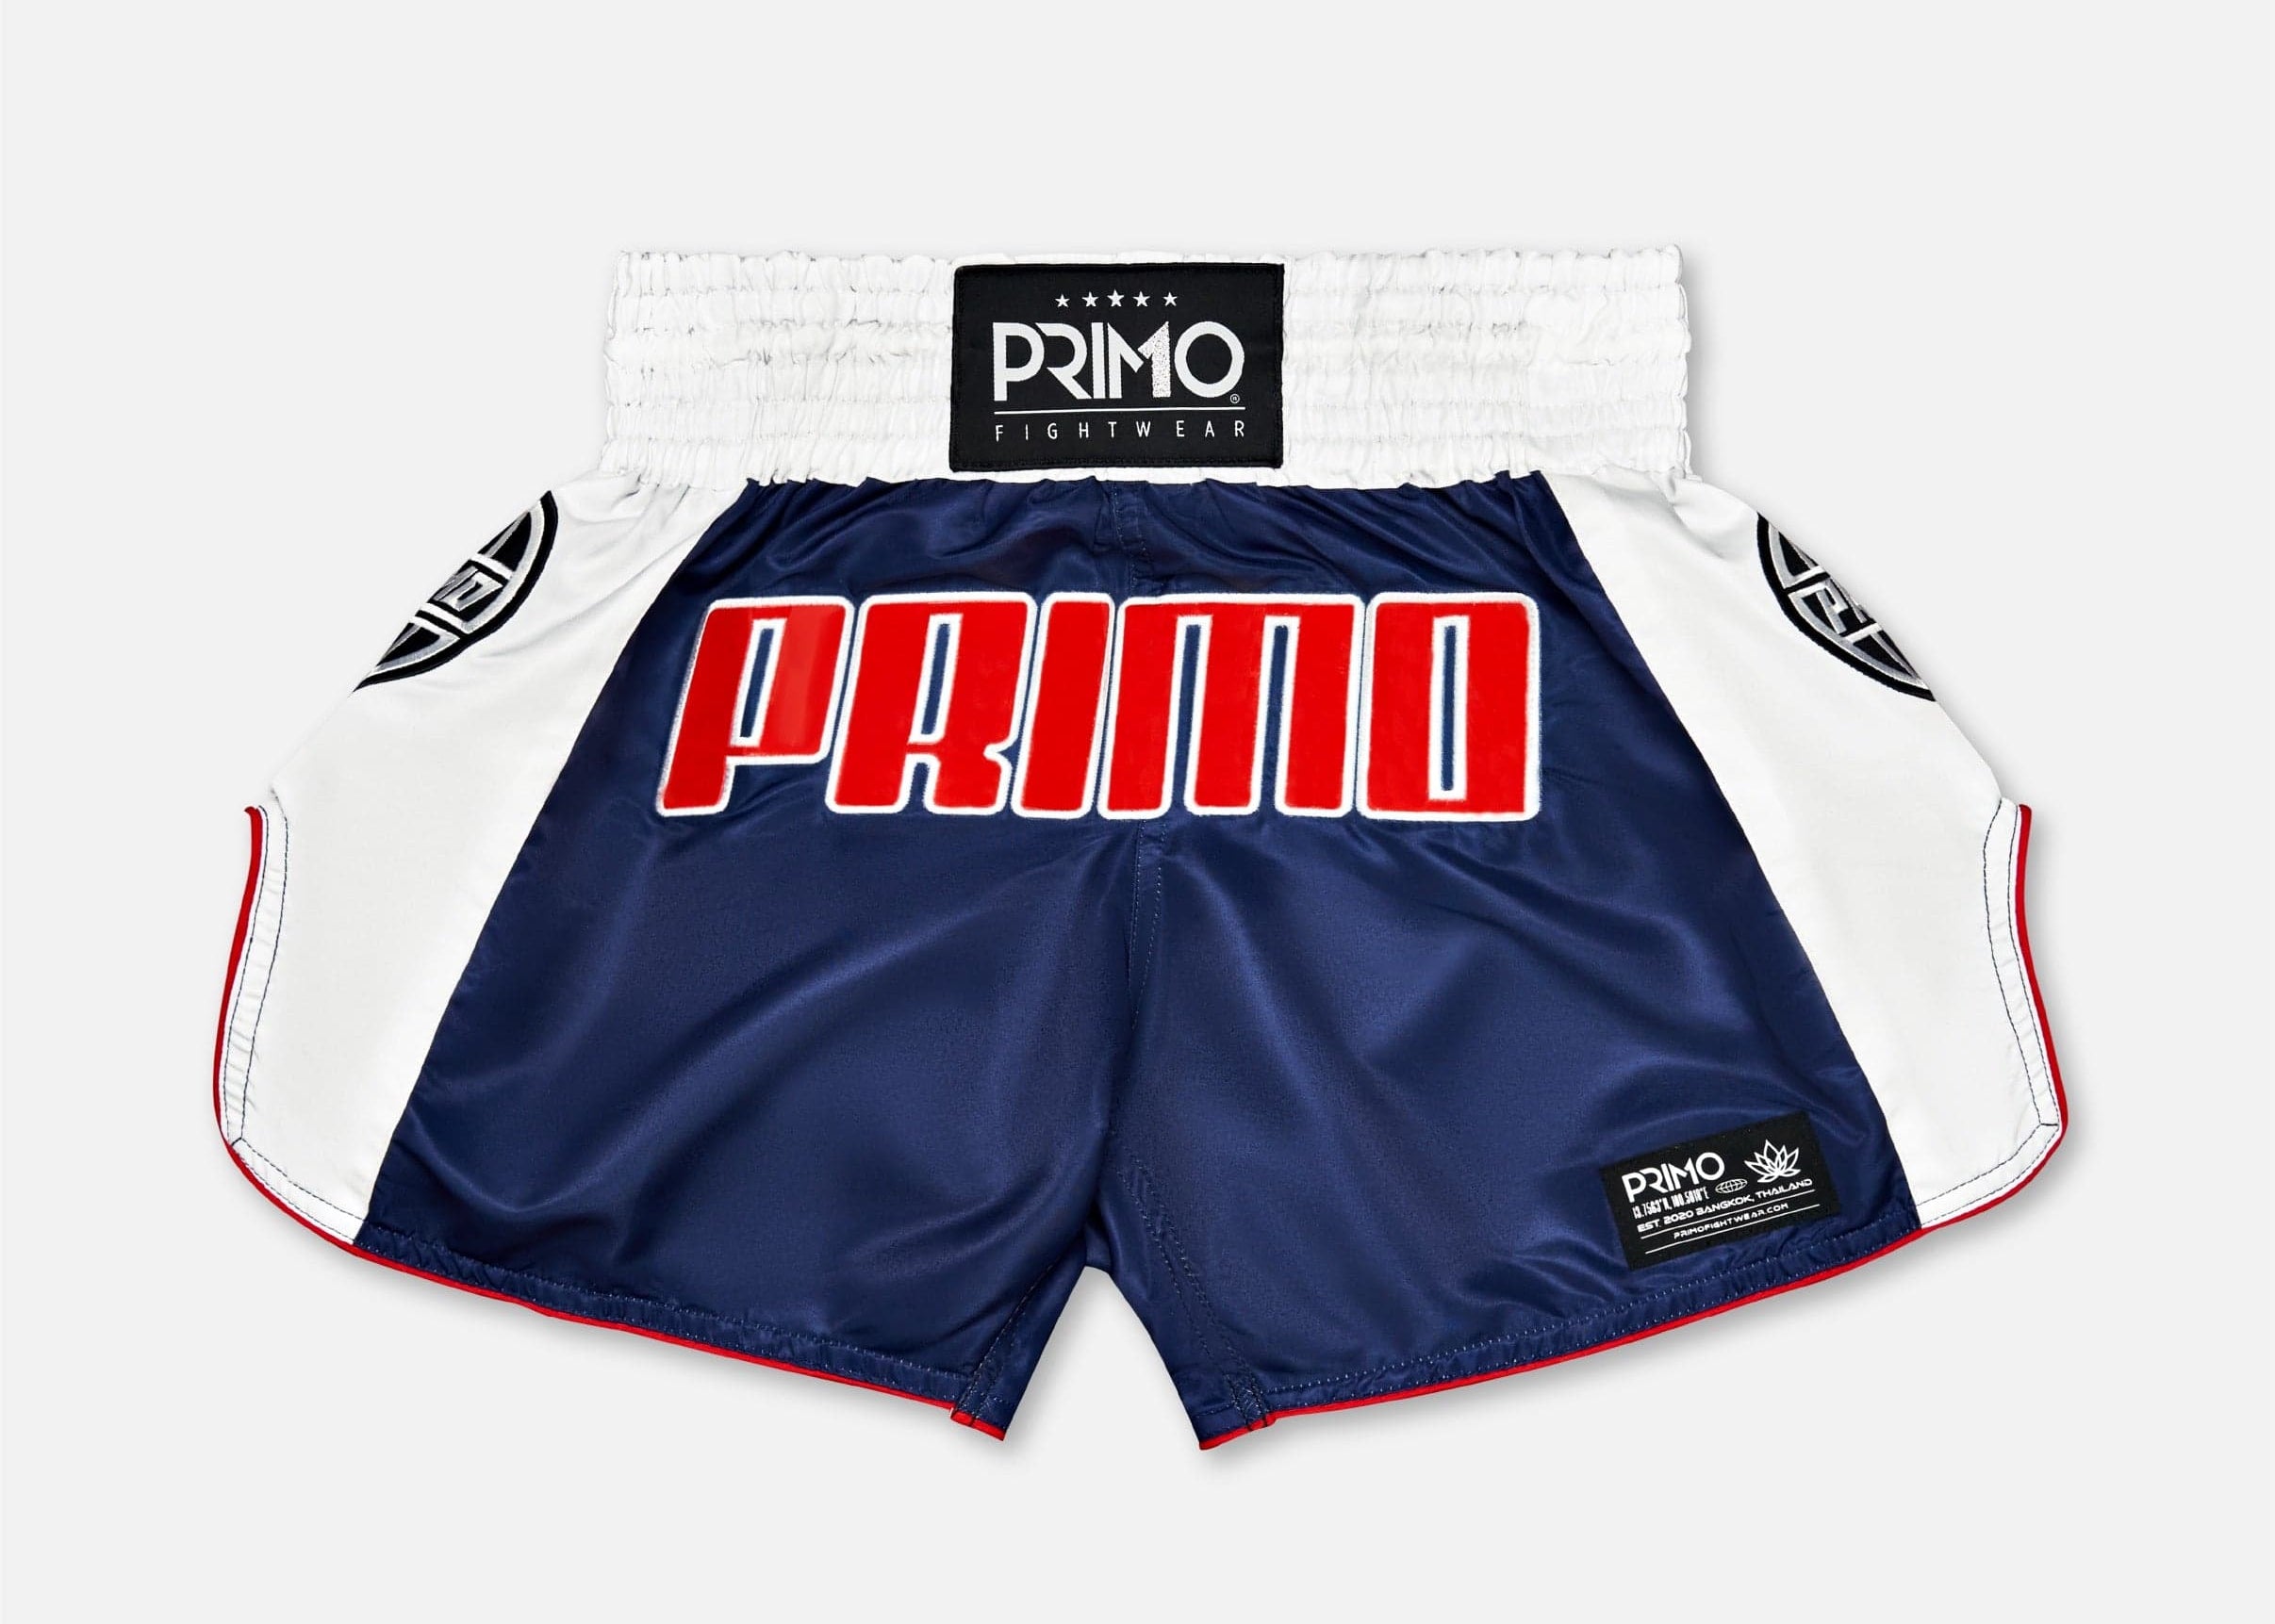 Primo Fight Wear Official Muay Thai Shorts - Trinity Series - Navy